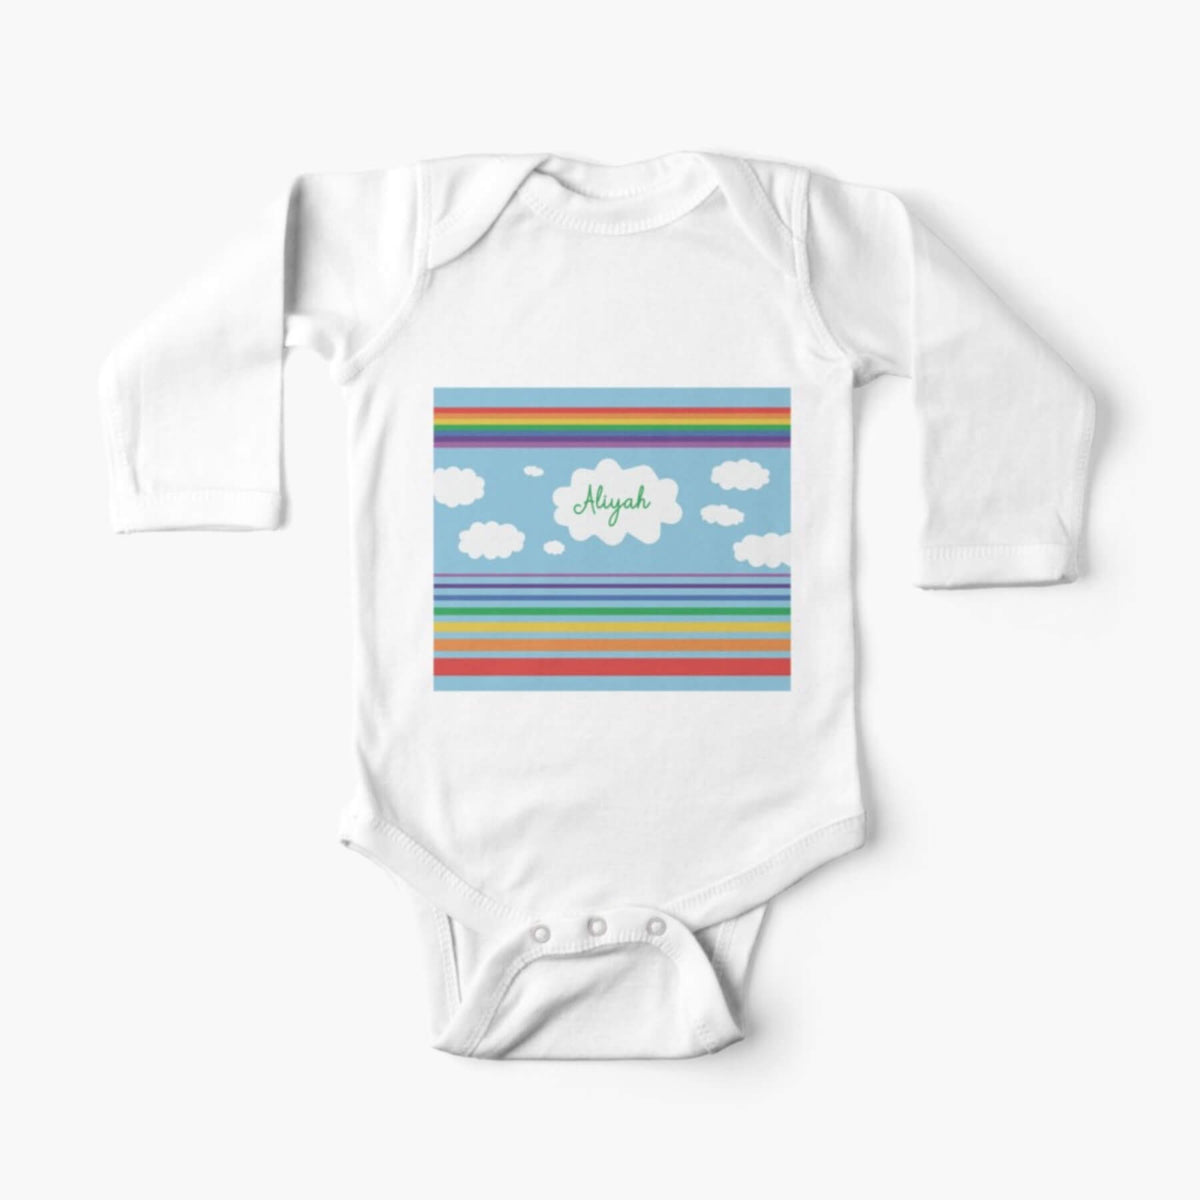 scallop-opening soft pure cotton long sleeve personalised baby onesie with print of baby&#39;s name in loopy green script on a fluffy white cloud against blue sky with clouds and horizontal rainbow stripes